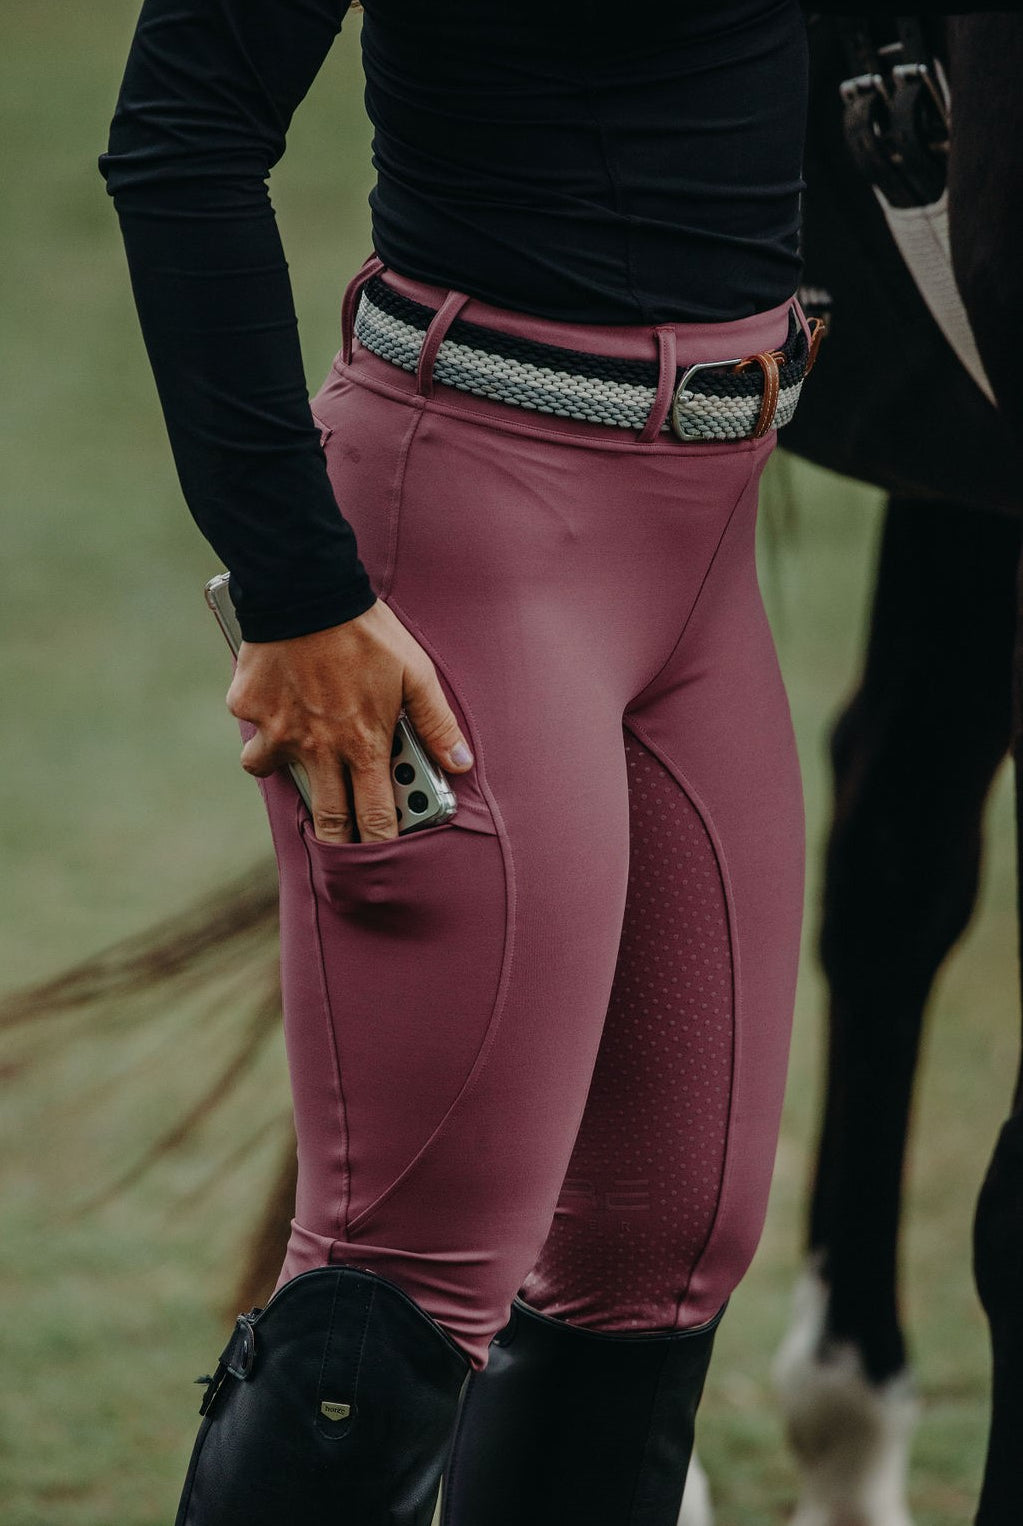 A person wearing Pure Canter Fusion Tights - Mulberry constructed from performance fabric, a woven belt, and black boots holds a partially visible phone in their right hand. The person is standing next to a horse, with the horse's body partially visible in the background.